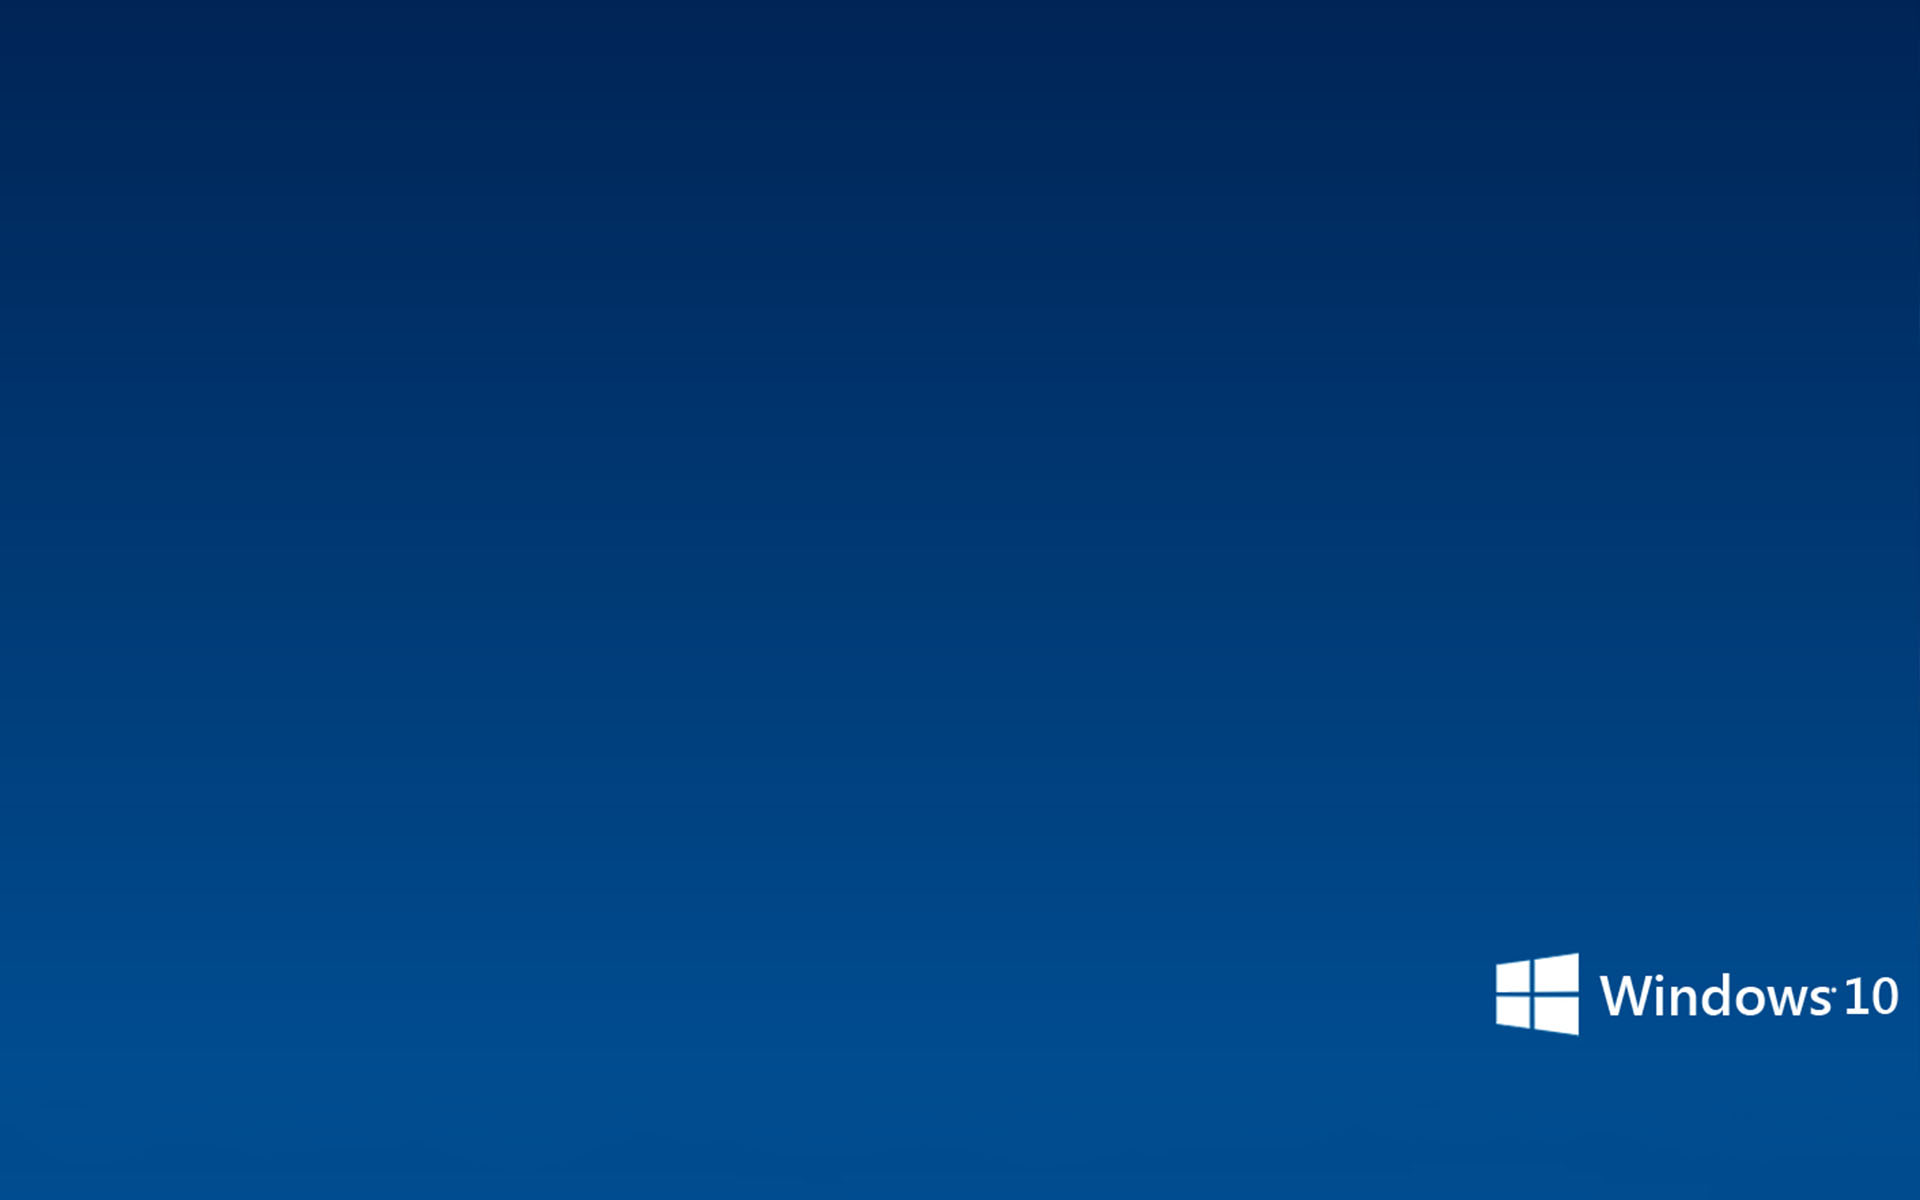 Free Download Simple Microsoft Windows 10 Wallpaper Wallpapers 19x10 For Your Desktop Mobile Tablet Explore 44 Win 10 Background Wallpaper Hd Wallpaper For Windows 10